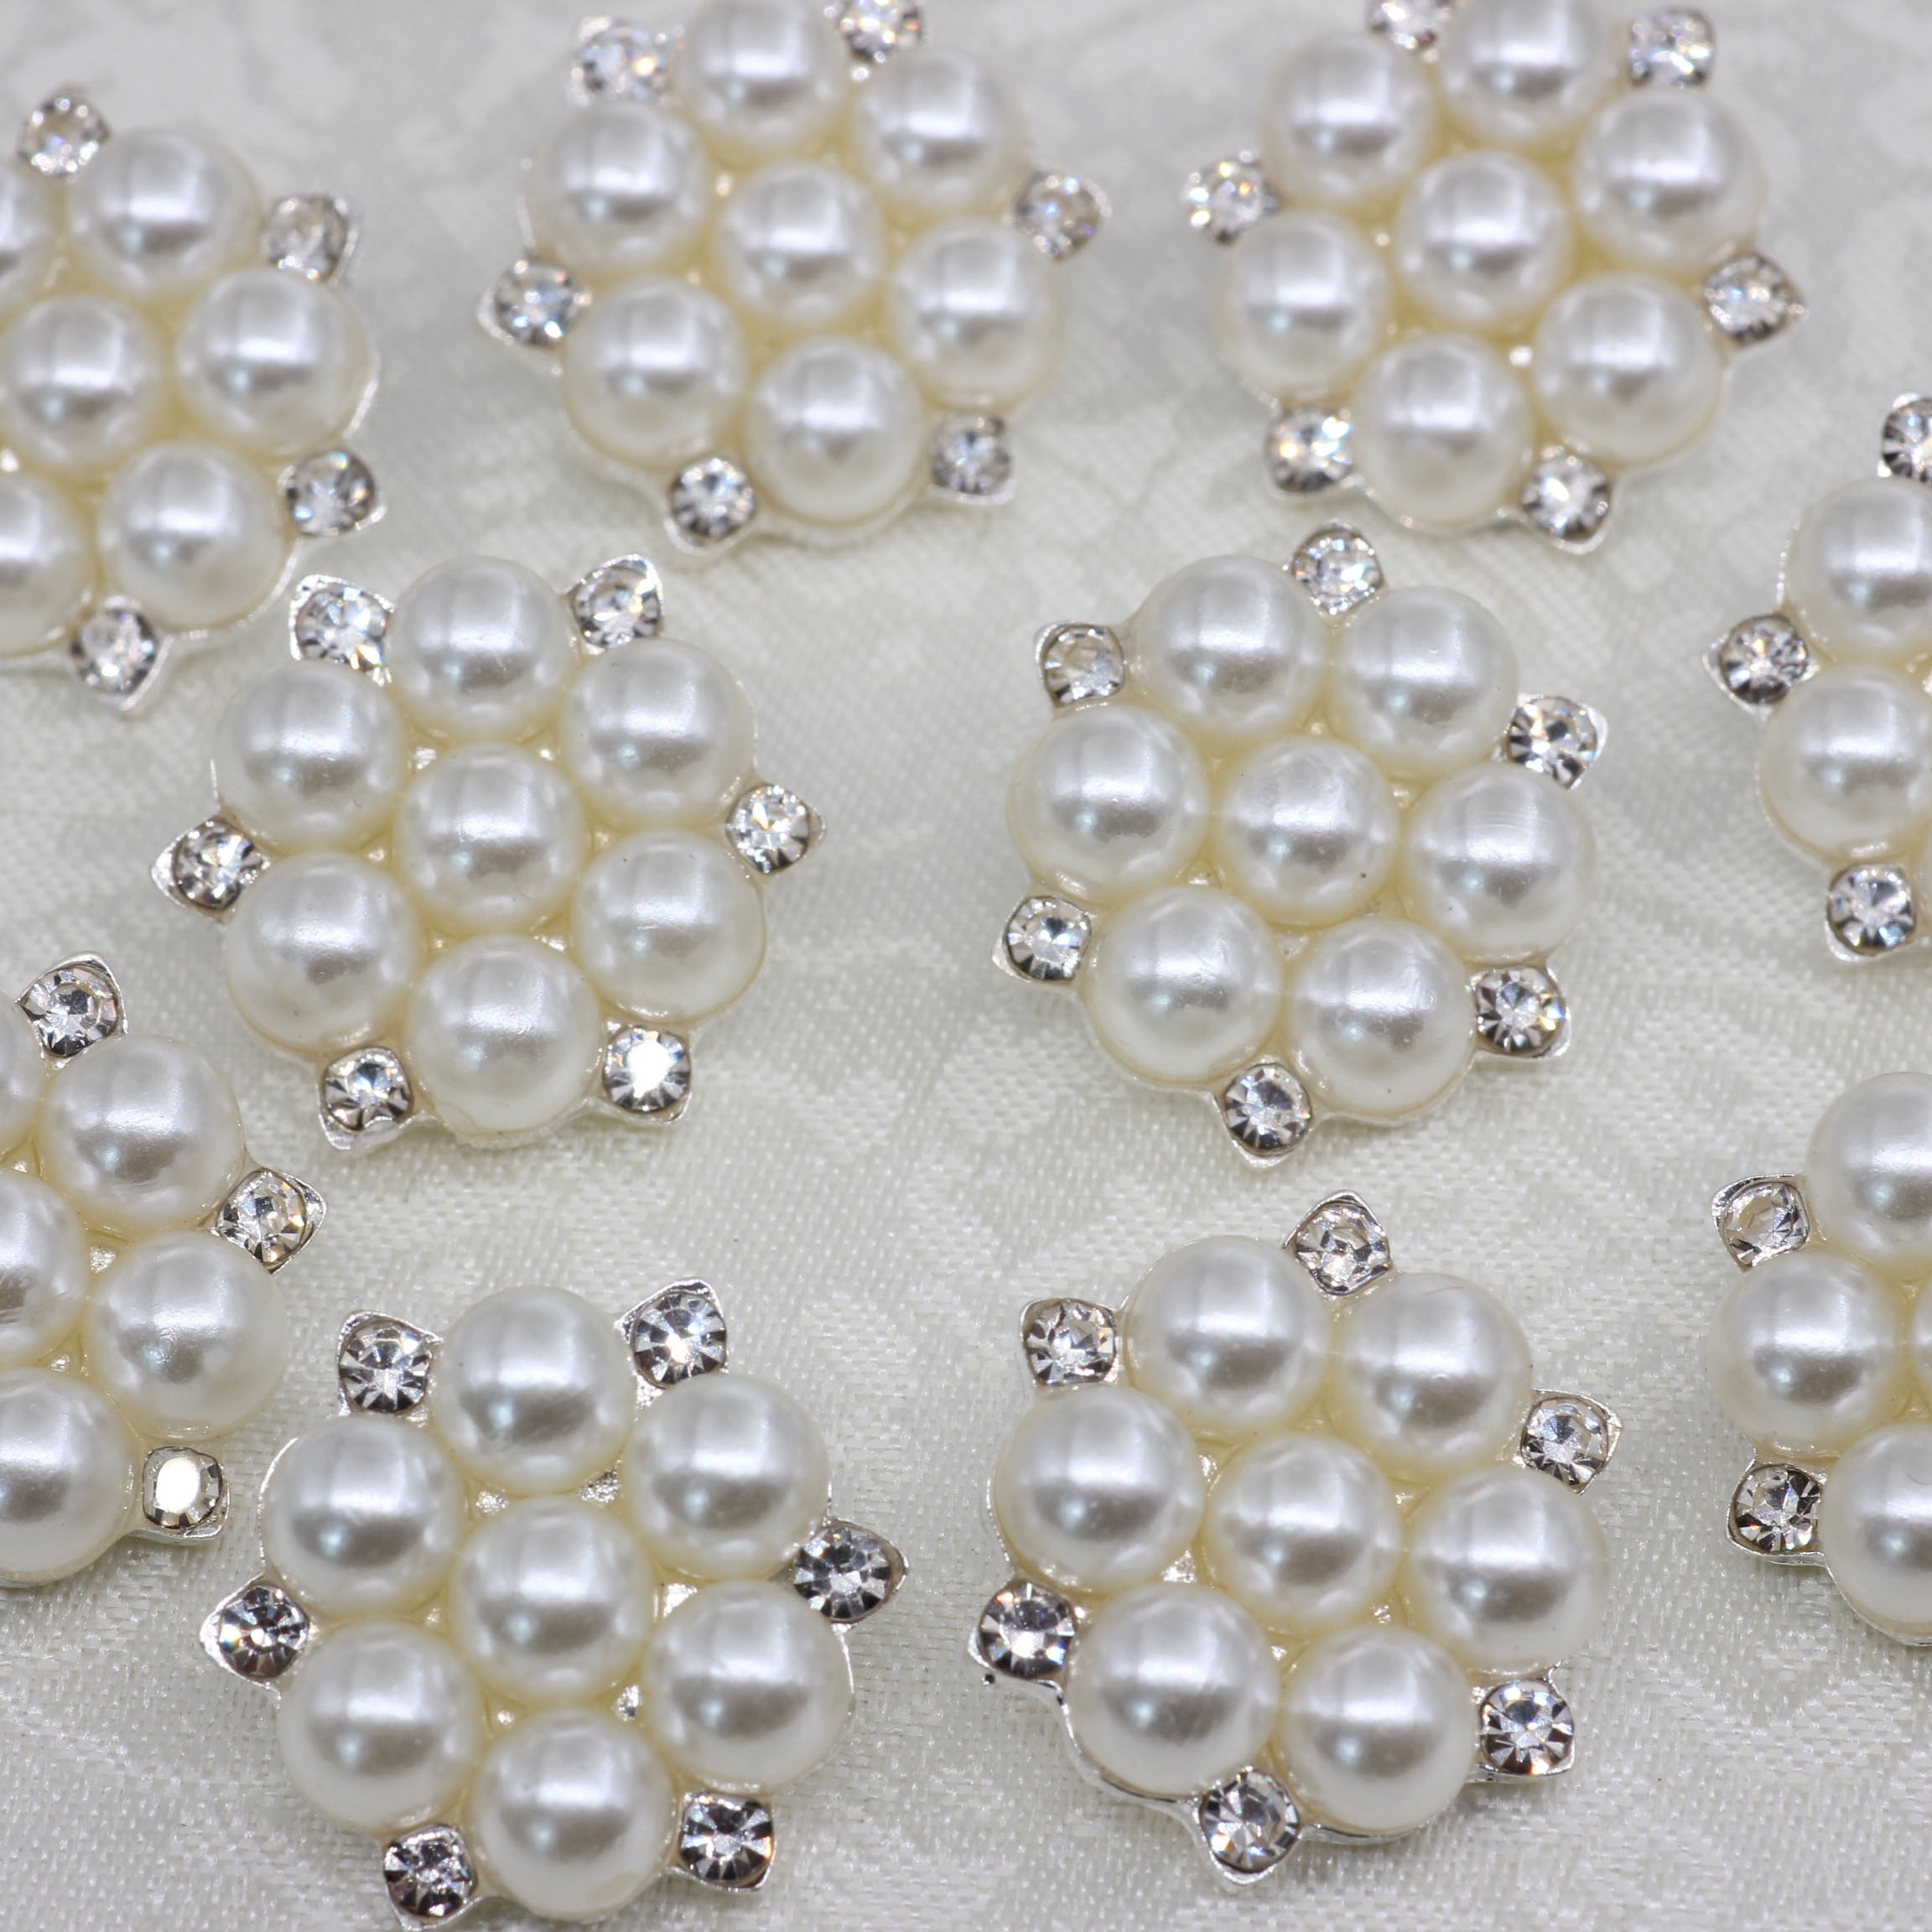 100 Pcs Half Round Pearl Buttons Sewing Decorate Rhinestones Clothing  Shirts